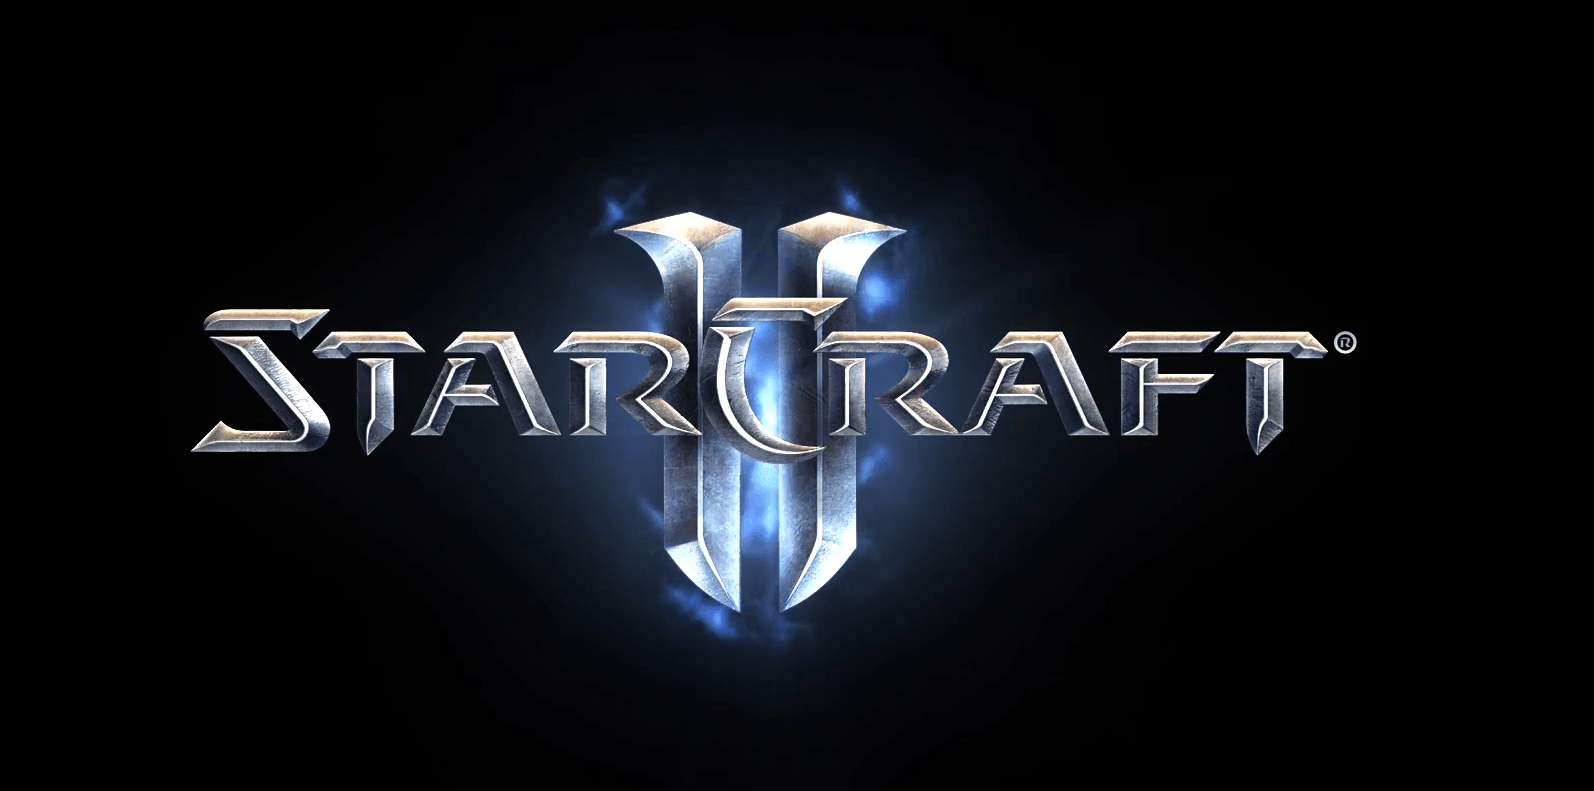 Starcraft Logo - StarCraft logo at the end of the new Co-op trailer, branding will be ...